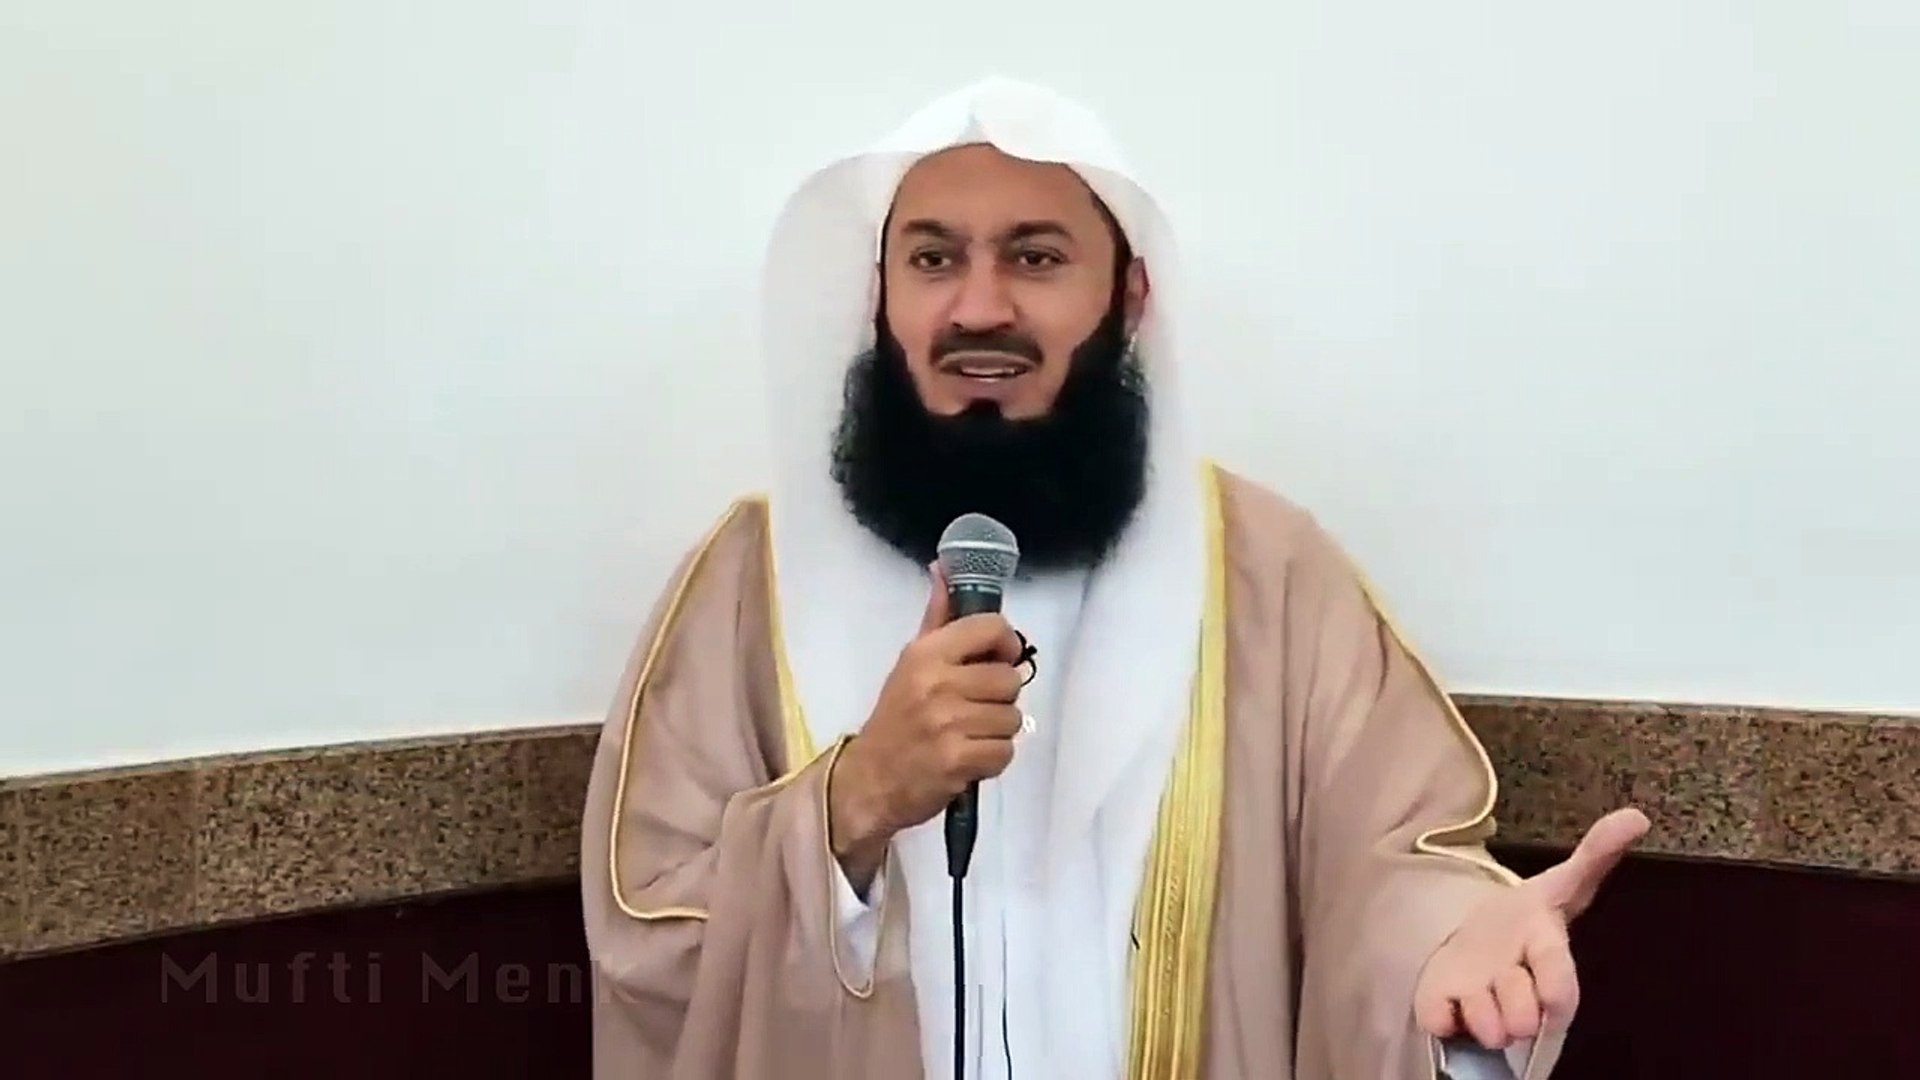 Enjoining Good And Forbidding Evil - Mufti MENK